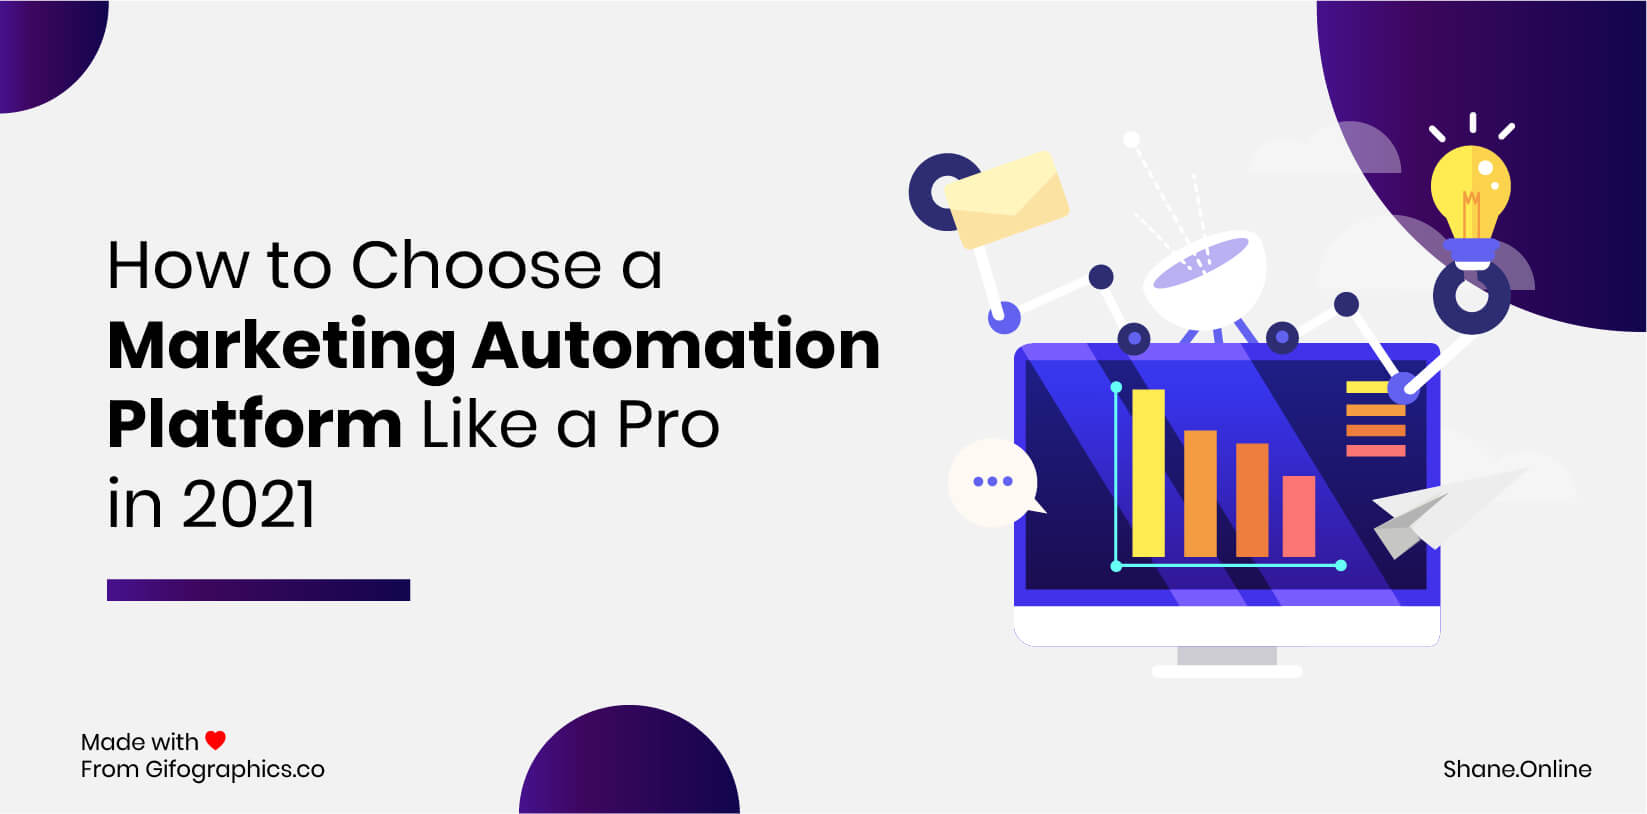 How to Choose Marketing Automation Platform Providers Like a Pro in 2022